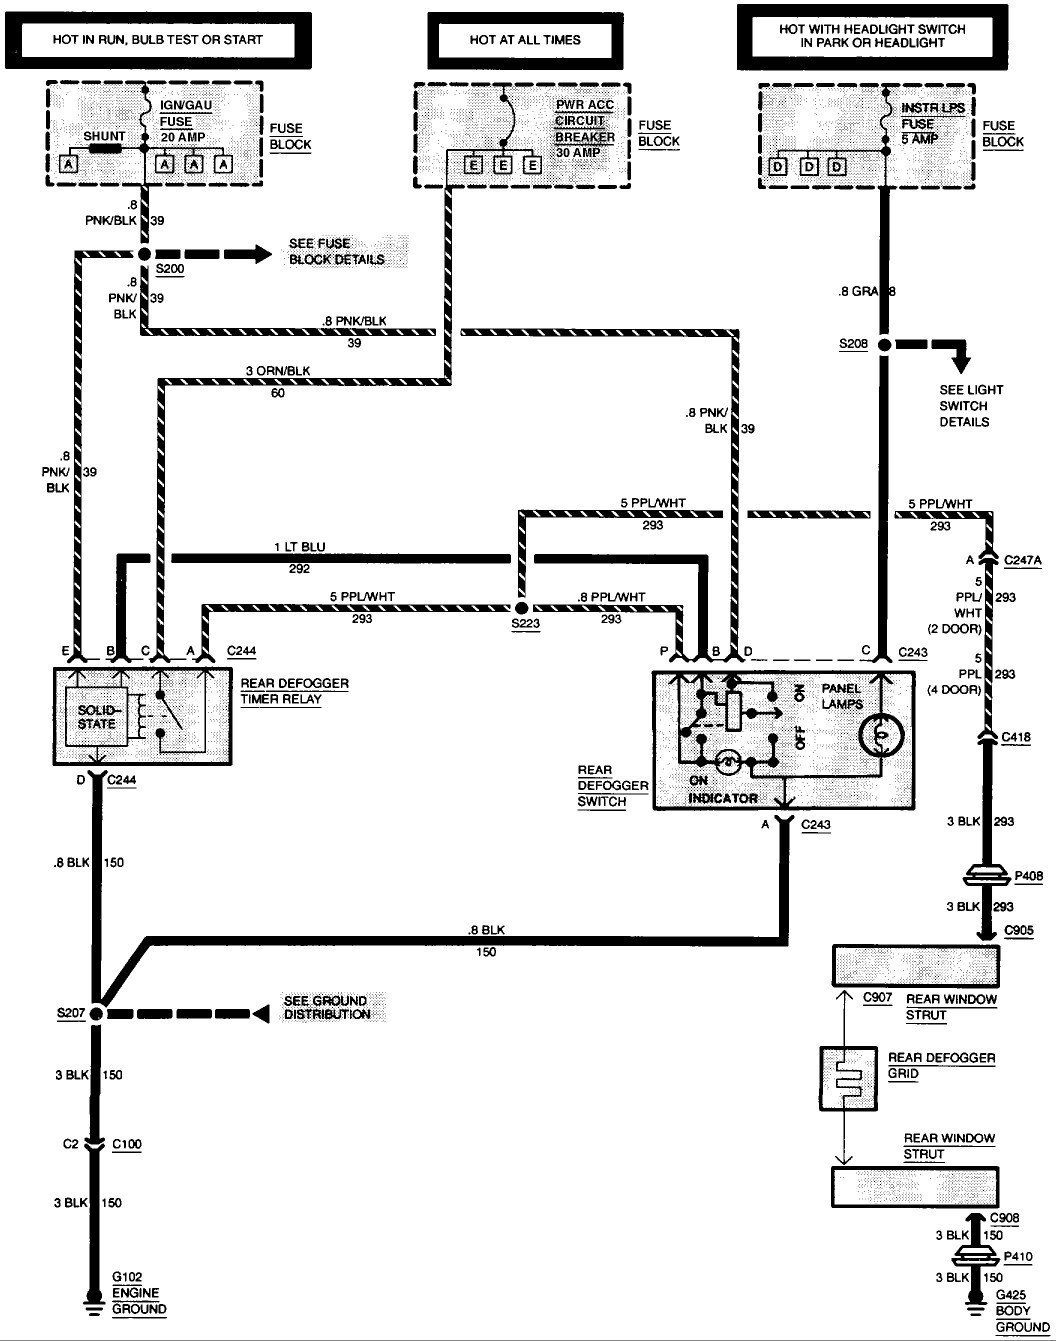 Labeled 2002 chevy s 10 wiring diagram 99 s 10 wiring diagram s 10 fuel pump wiring diagram s10 wiring diagram s10 wiring diagram pdf